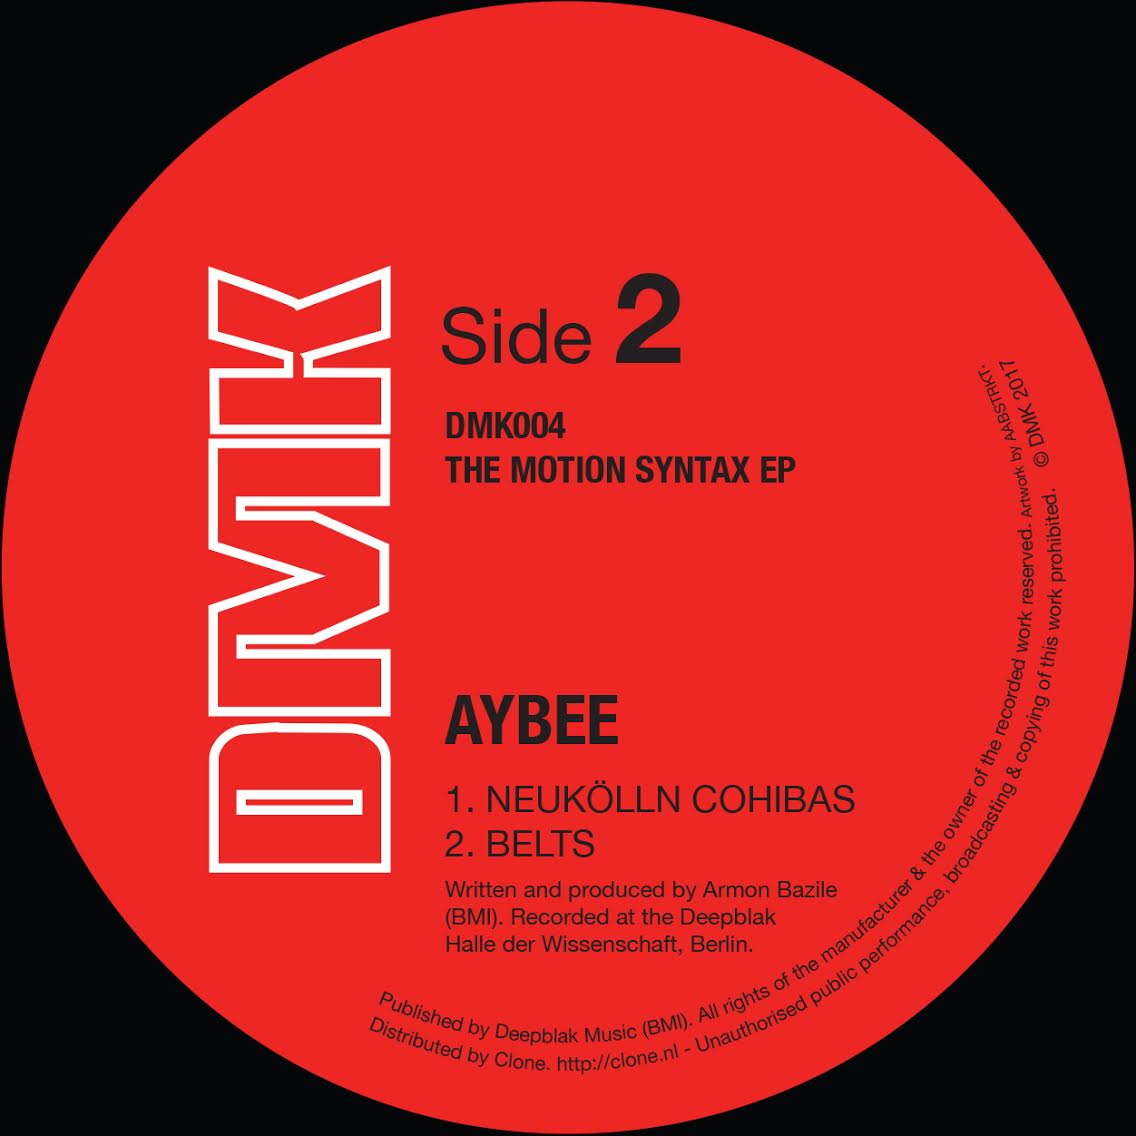 Aybee/THE MOTION SYNTAX EP 12"